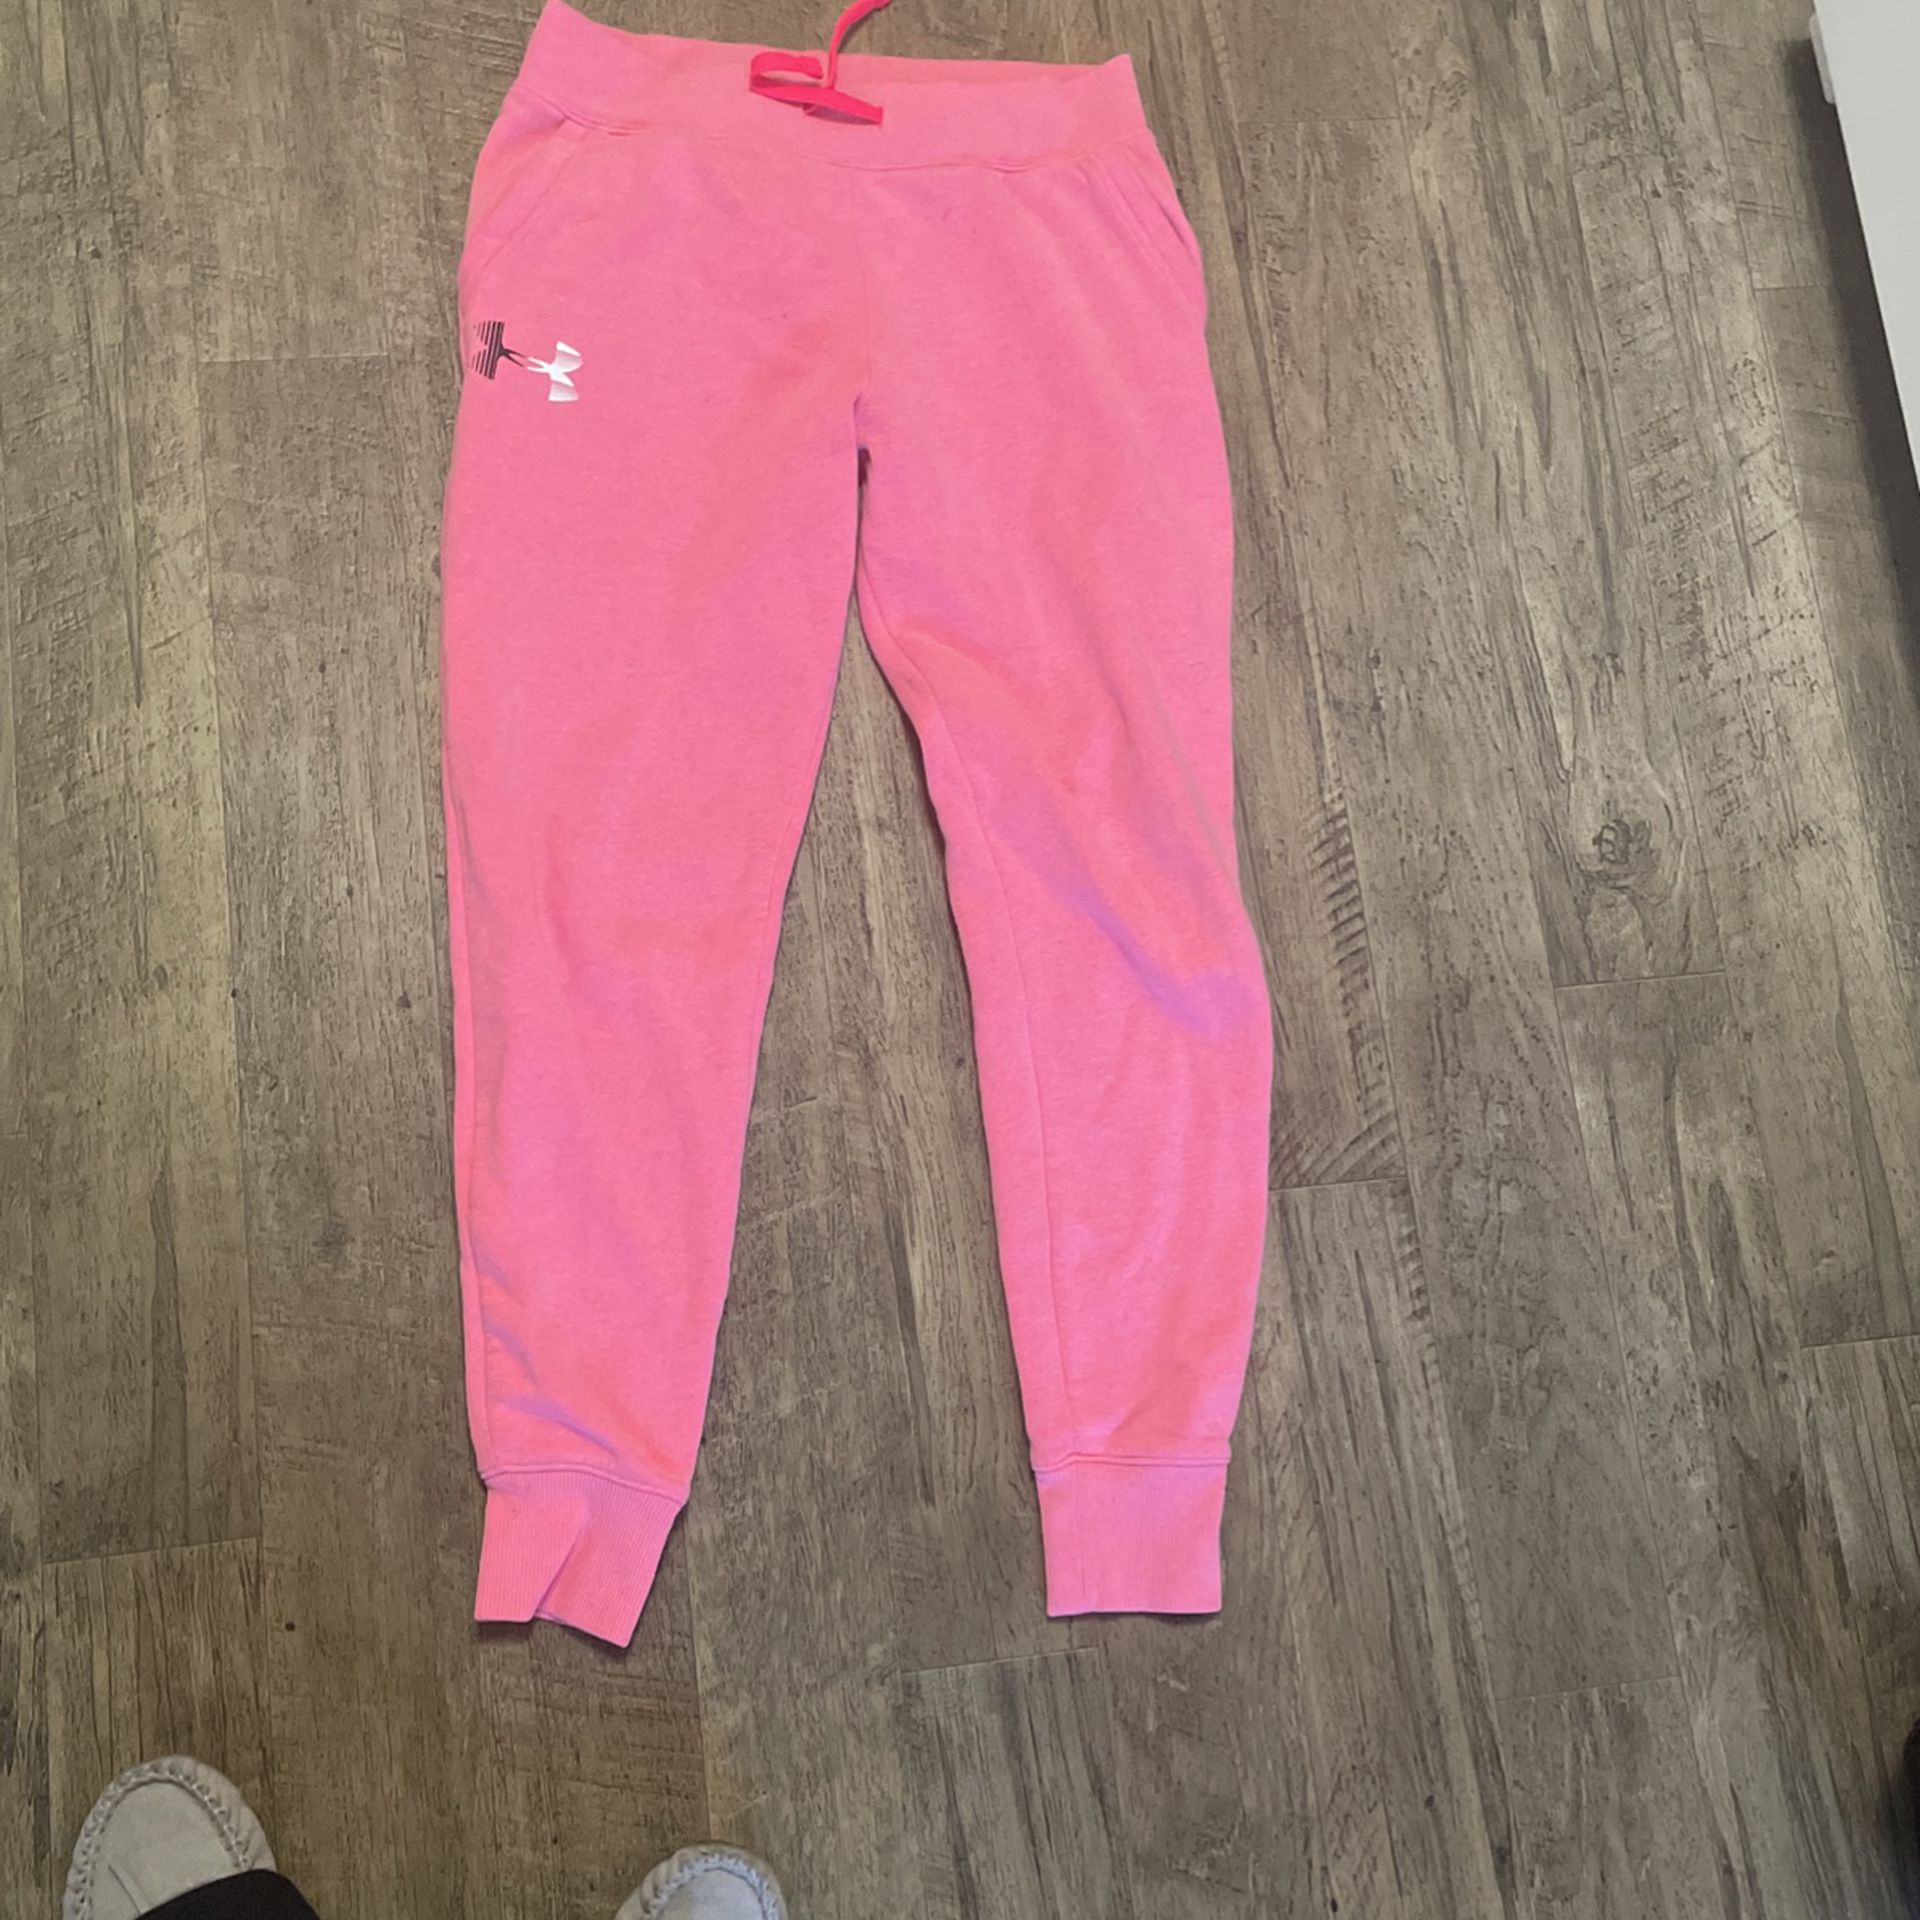 Under Amour Sweatpants Youth XL. Fit Like An Adult Small 